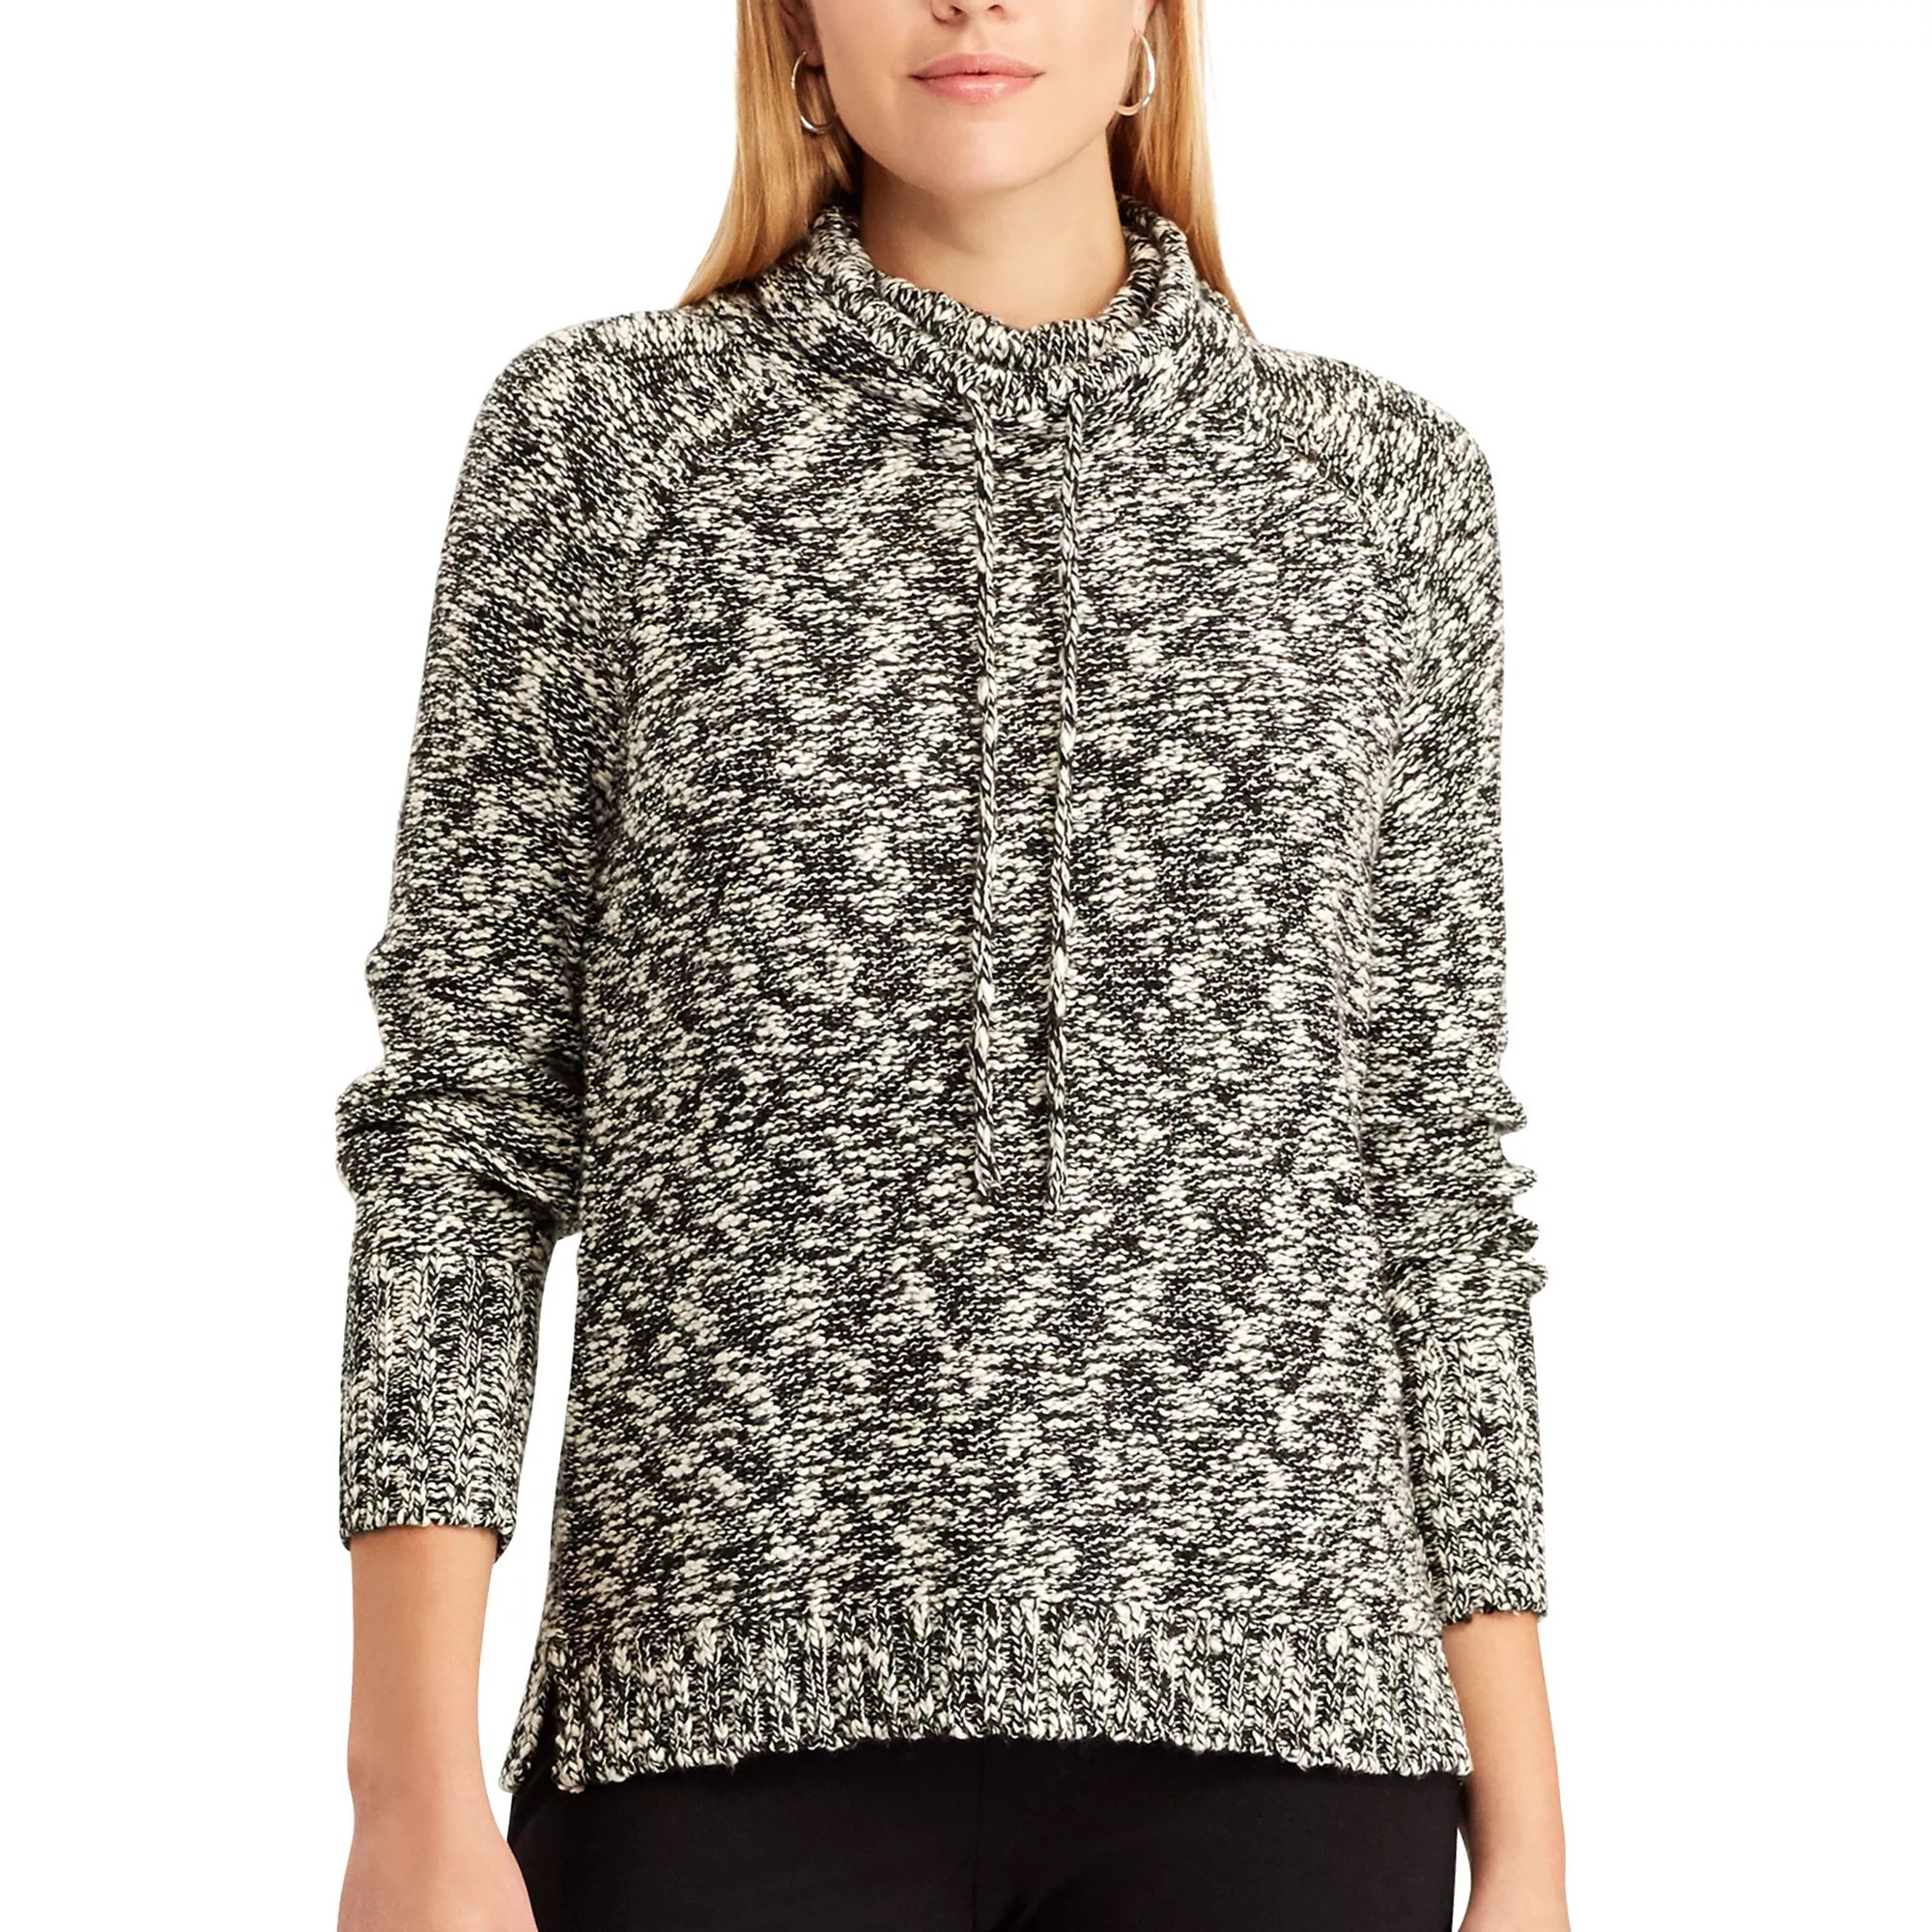 Women's Chaps Marled Funnel Neck Sweater | Kohl's